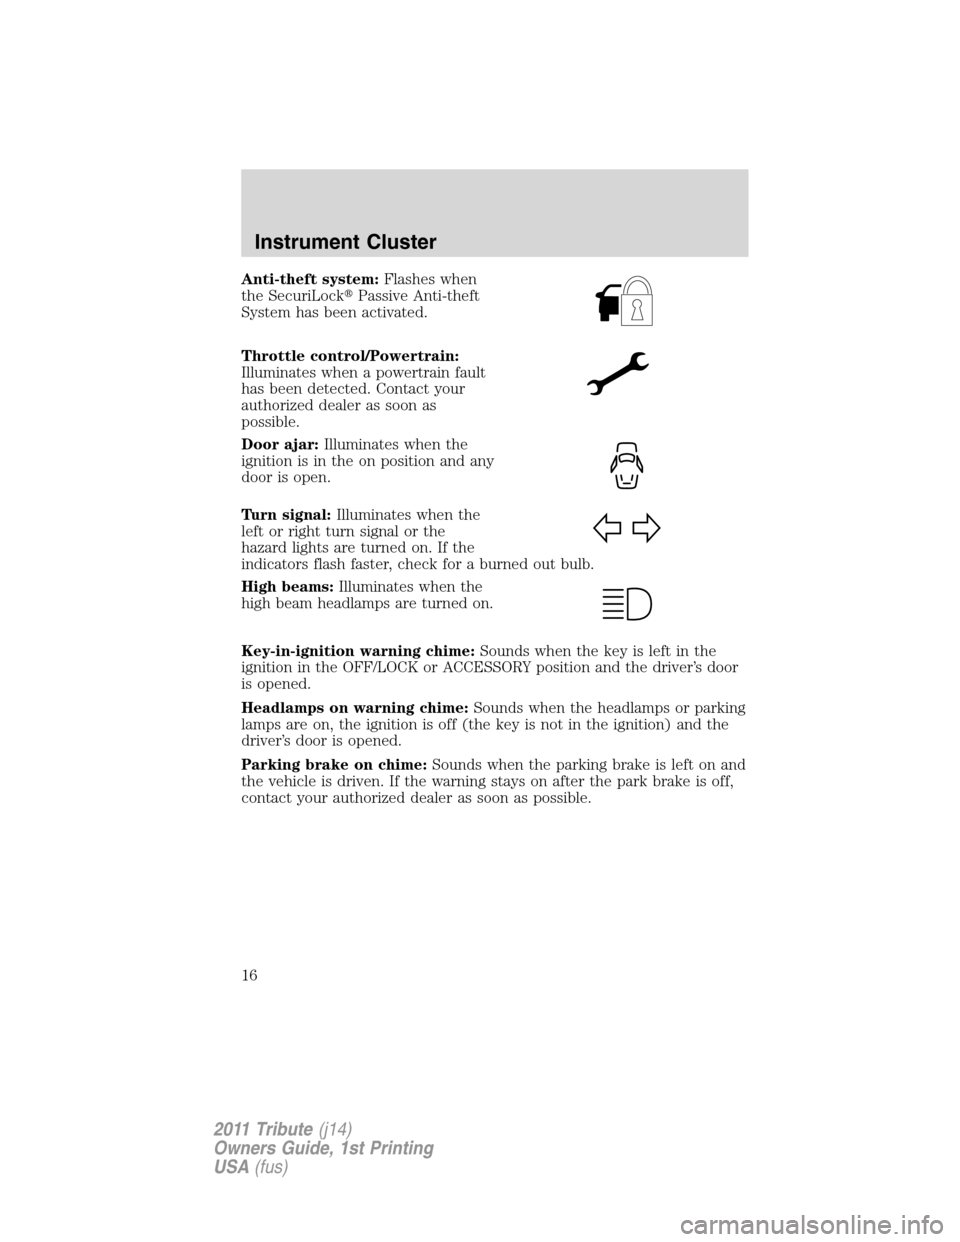 MAZDA MODEL TRIBUTE 2011  Owners Manual (in English) Anti-theft system:Flashes when
the SecuriLockPassive Anti-theft
System has been activated.
Throttle control/Powertrain:
Illuminates when a powertrain fault
has been detected. Contact your
authorized 